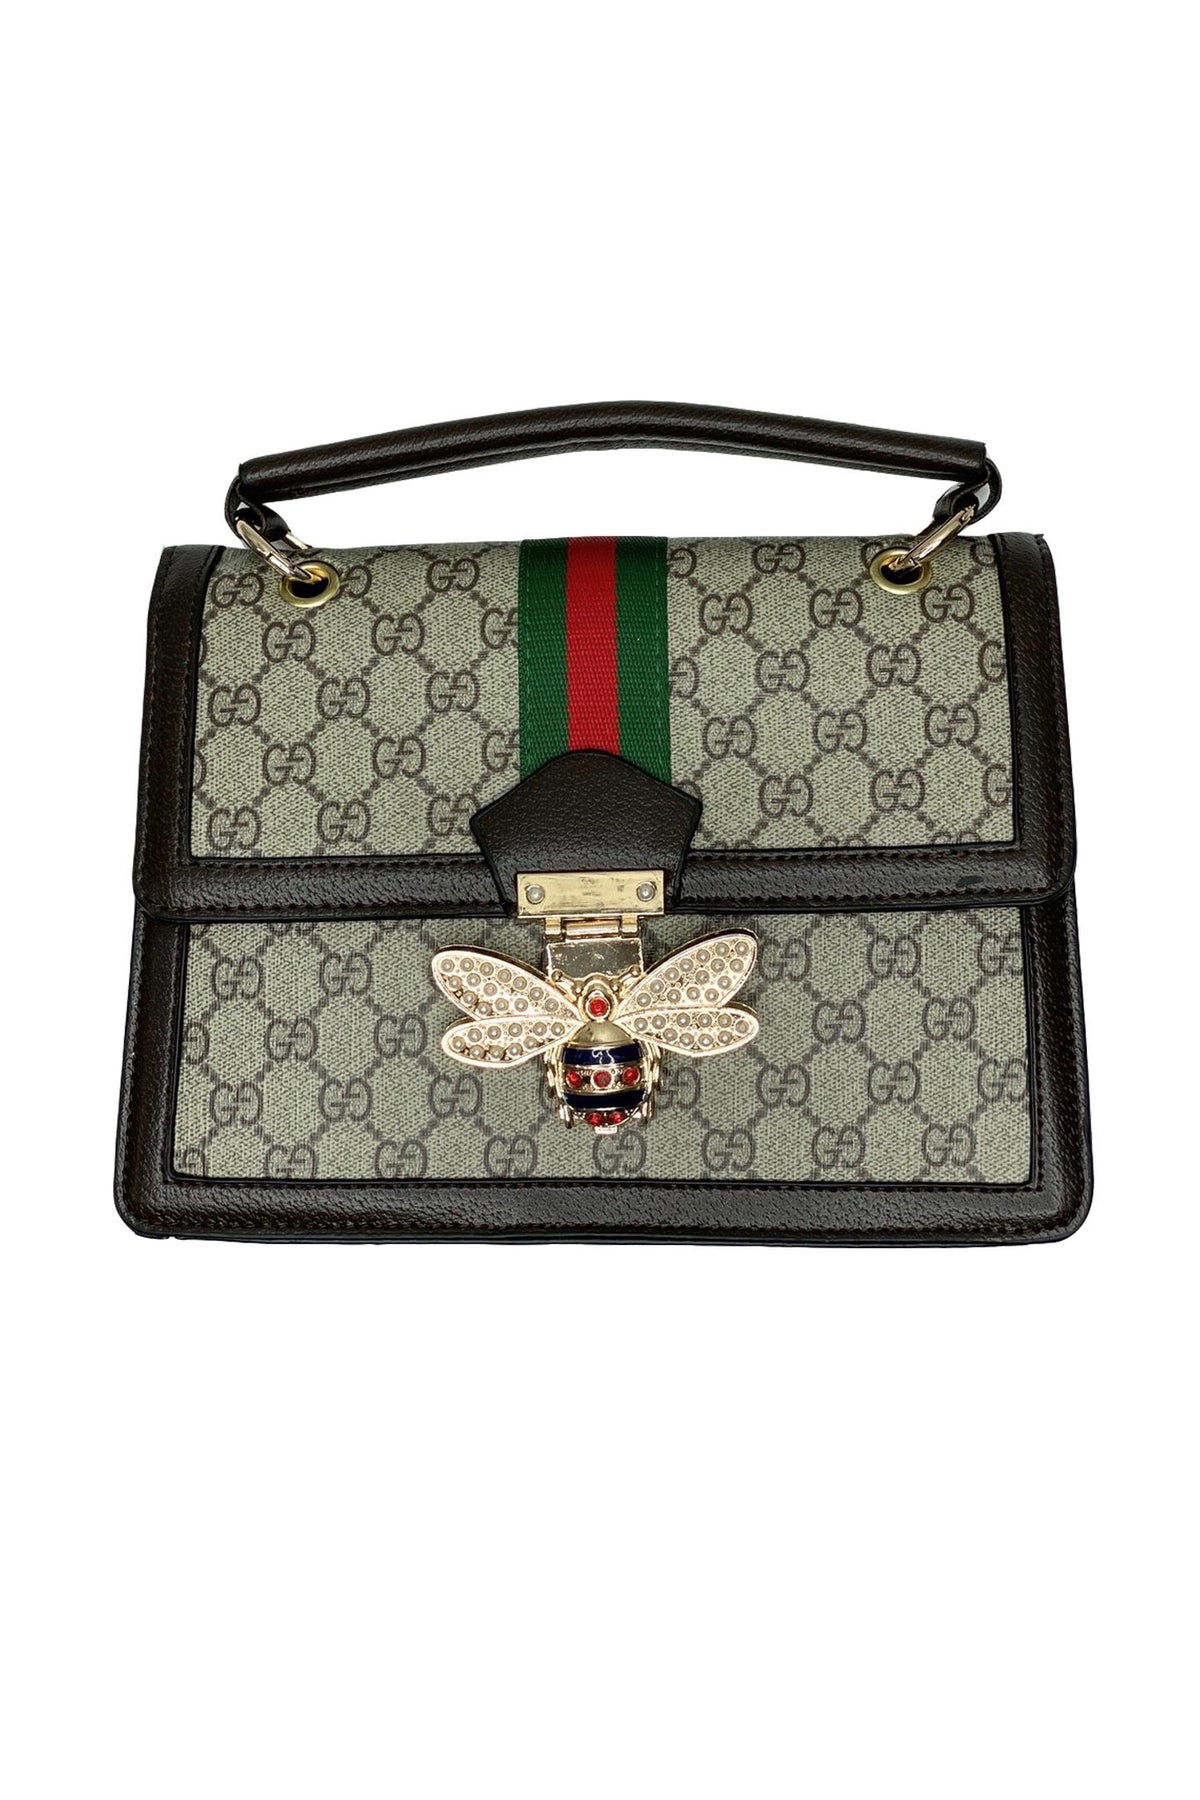 gucci bag with the bee